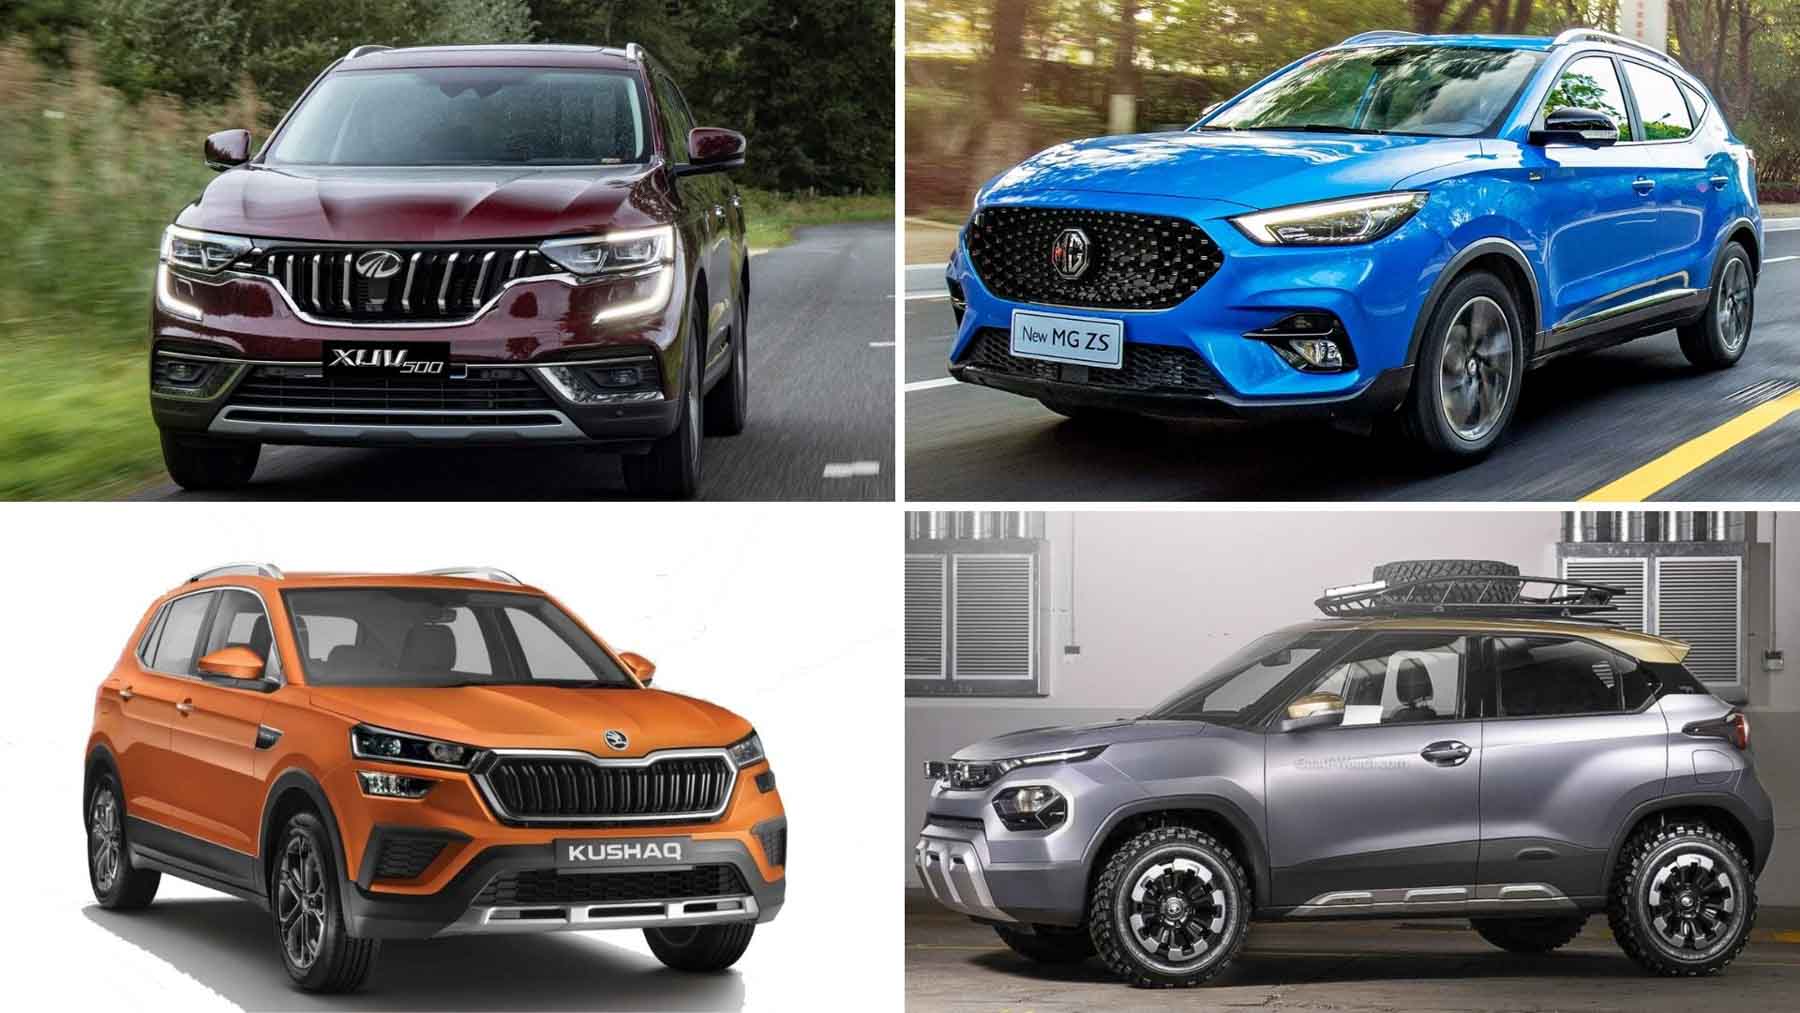 16 new suvs set to be launched in india by diwali 2022